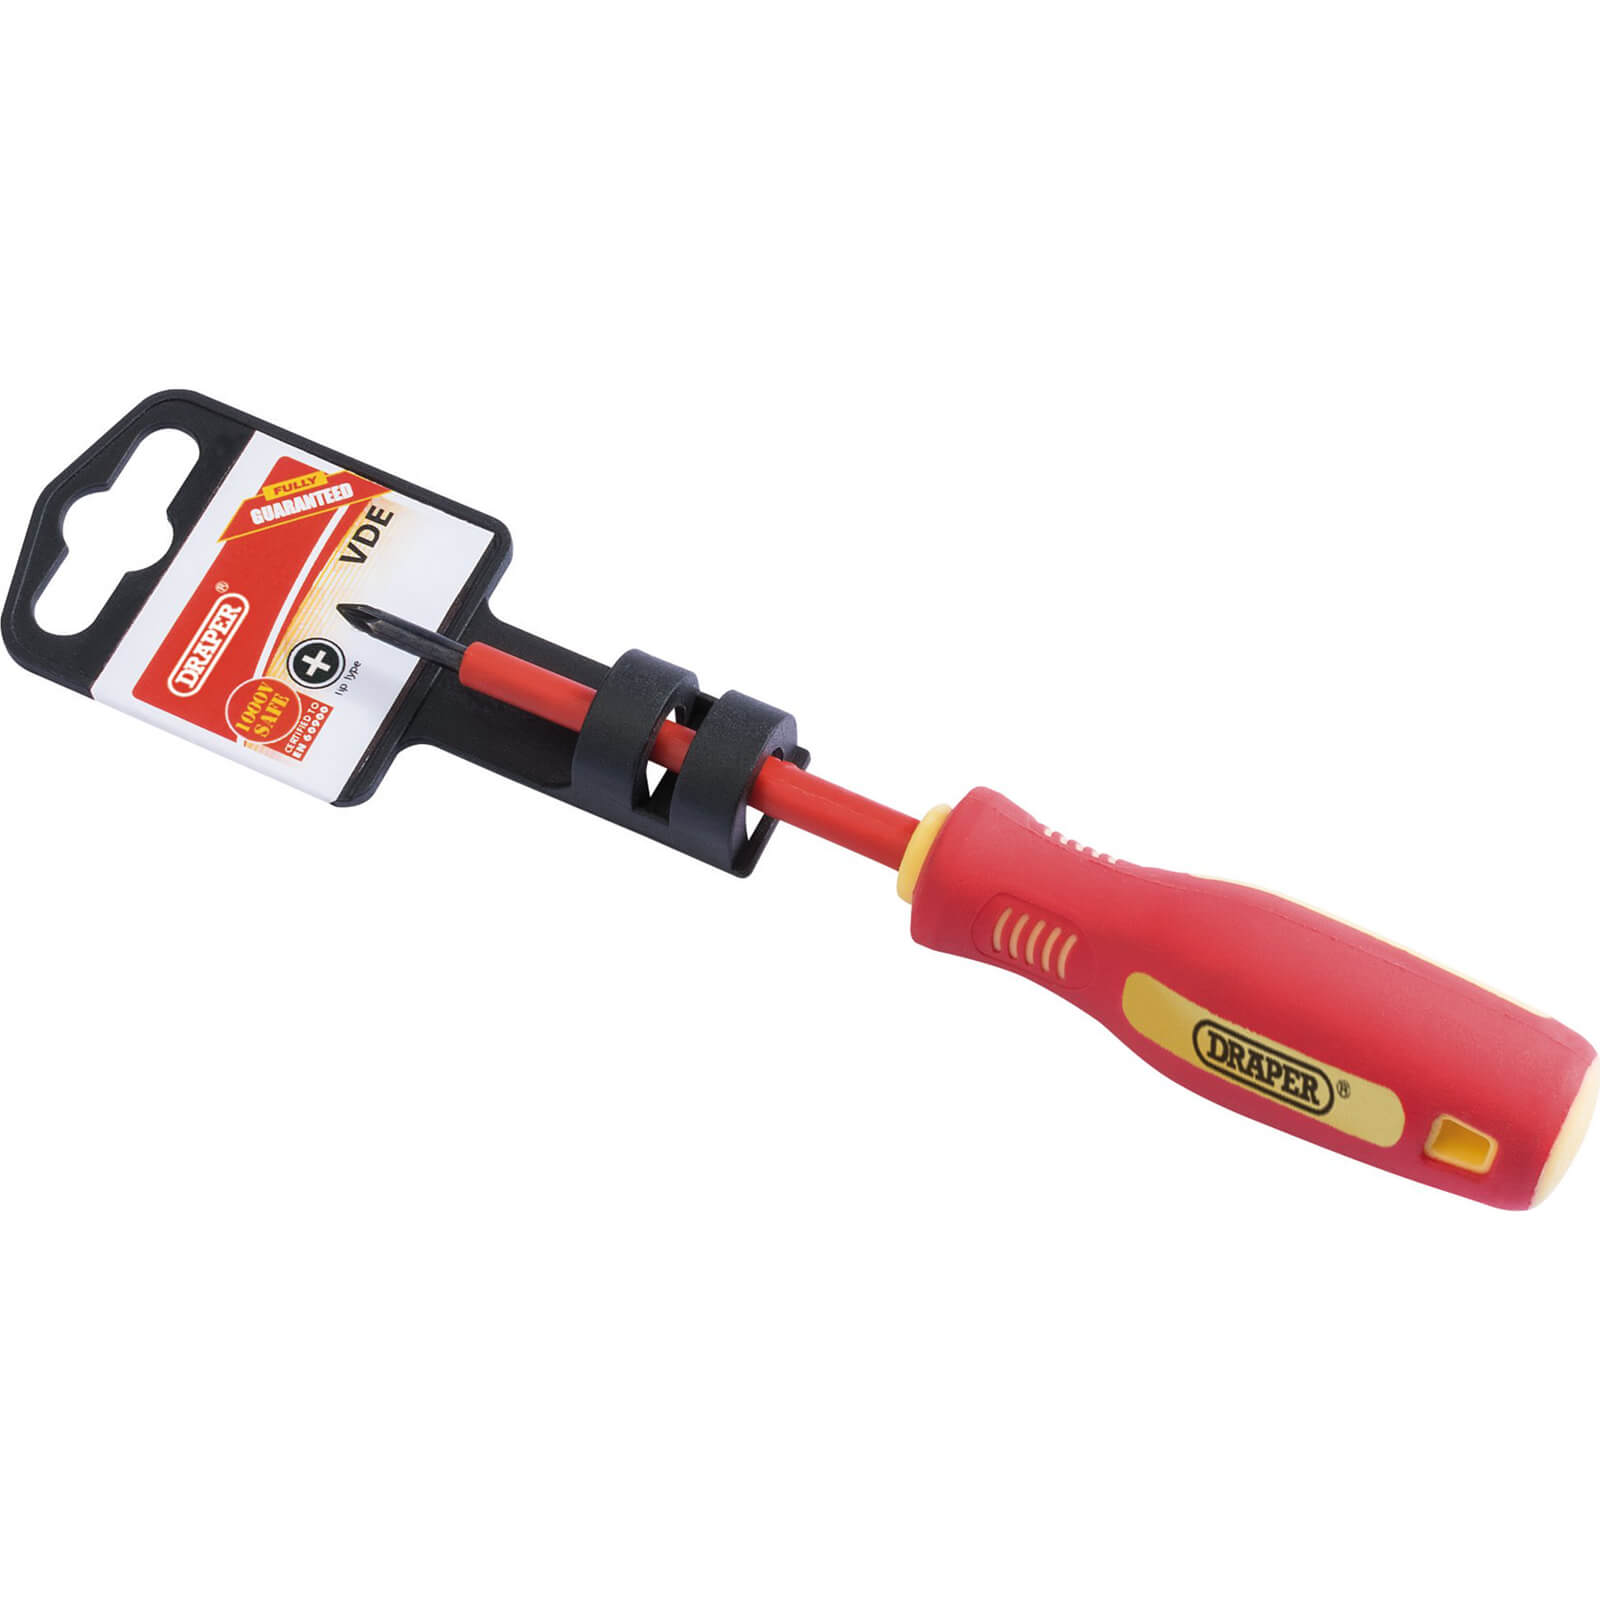 Image of Draper VDE Insulated Phillips Screwdriver PH0 75mm